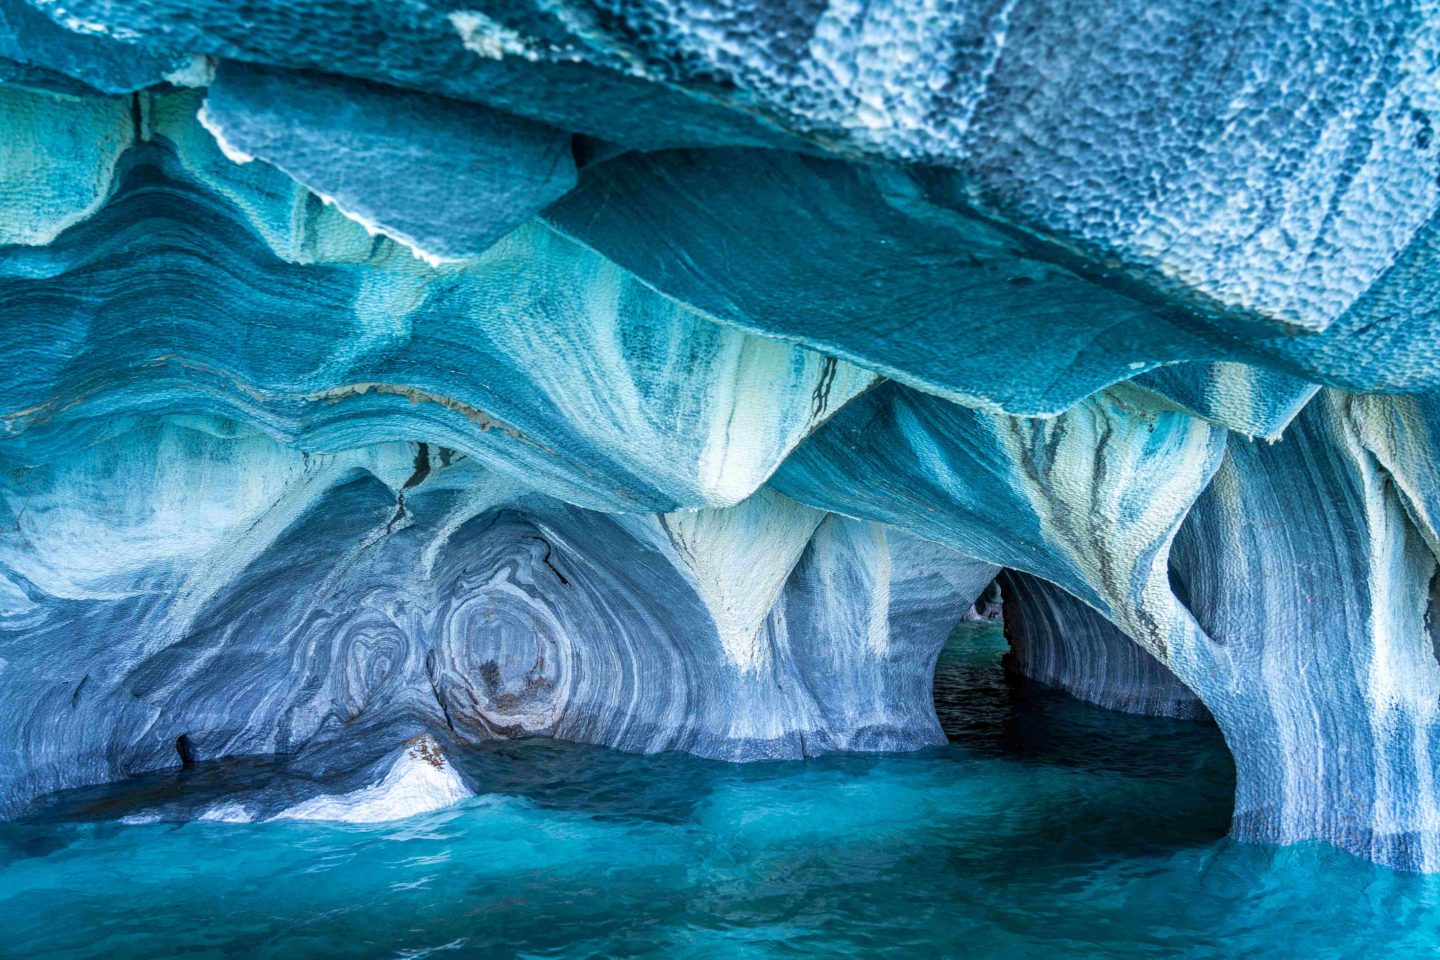 A stunning view of the inside of a cave, with elaborate patterns and layers of blue and white on the walls.